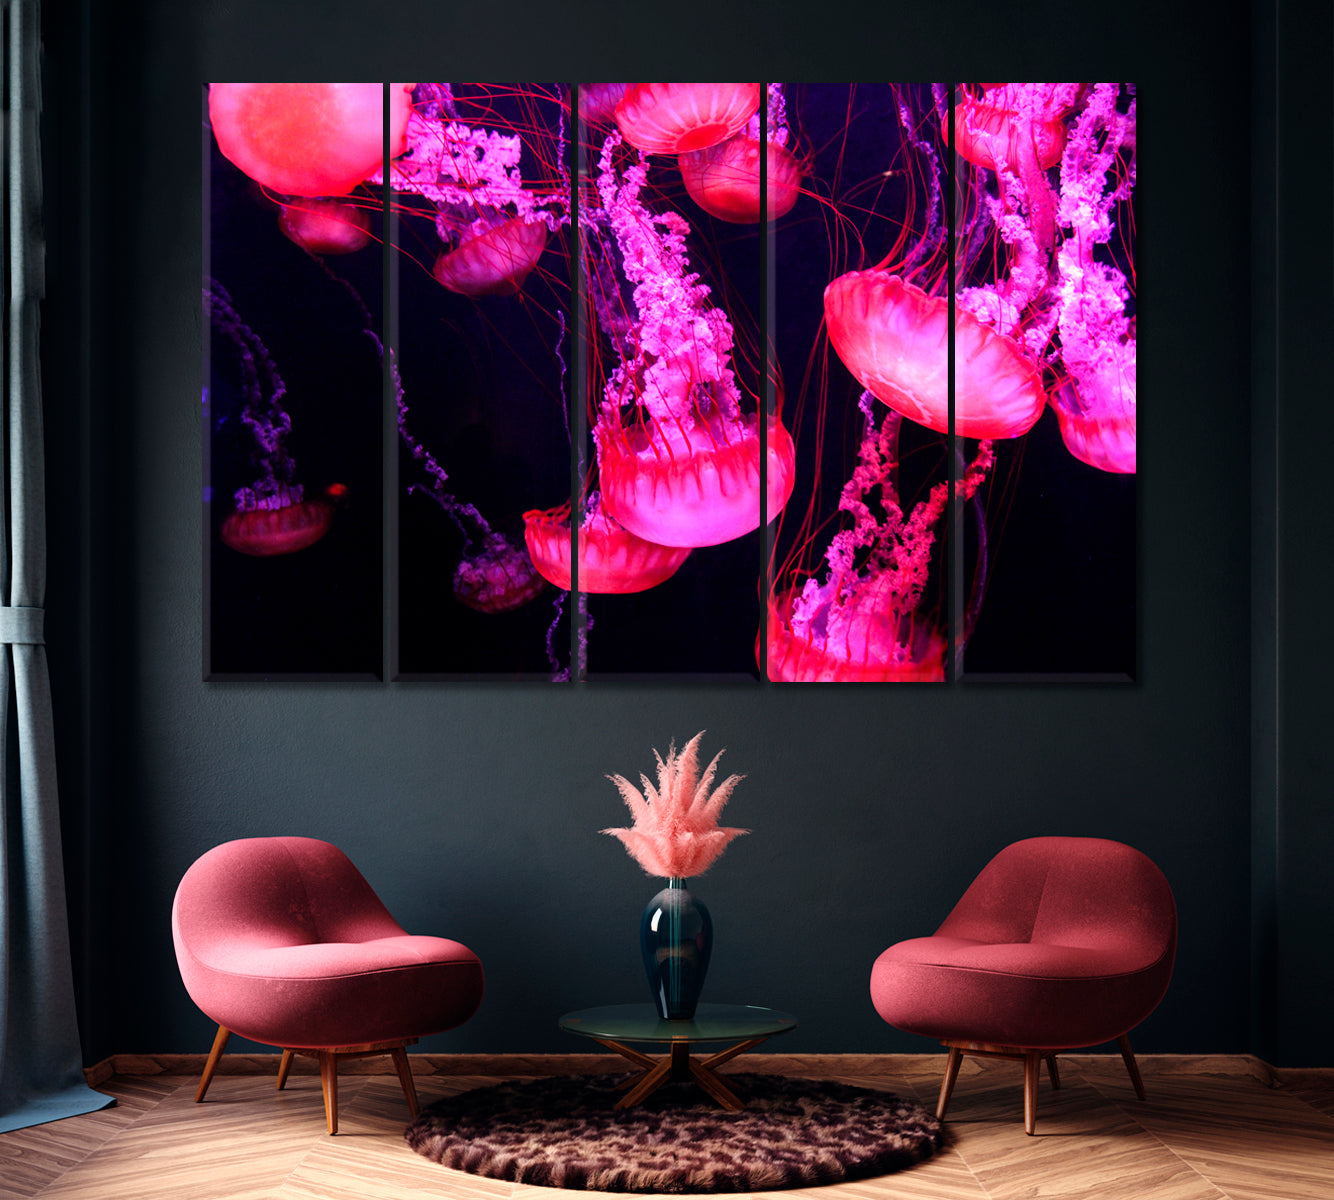 Glowing Jellyfish Canvas Print ArtLexy 5 Panels 36"x24" inches 